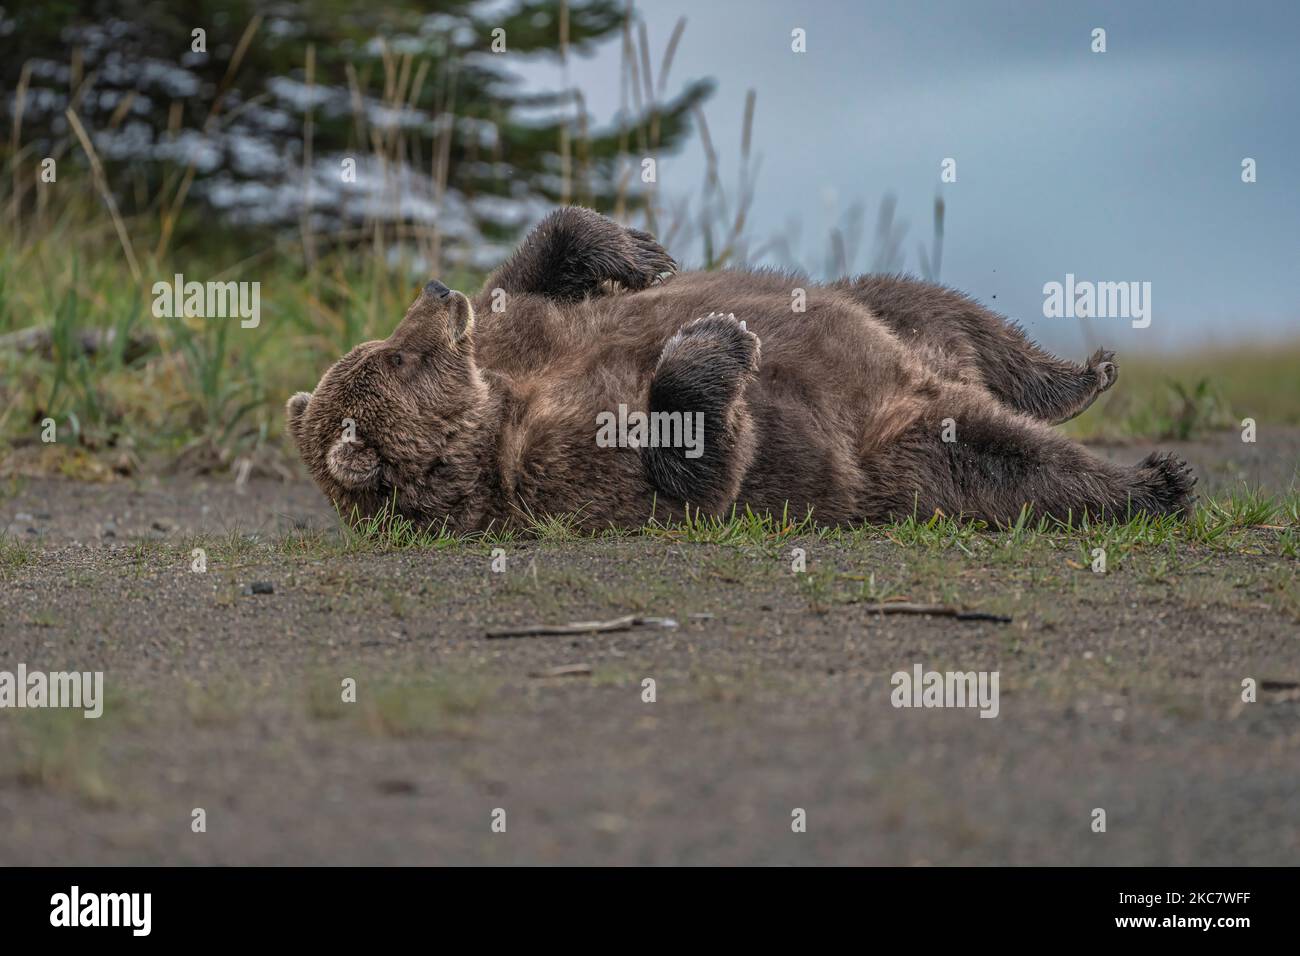 A wild Alaska Peninsula brown bear lying on the ground in a forest in daylight Stock Photo